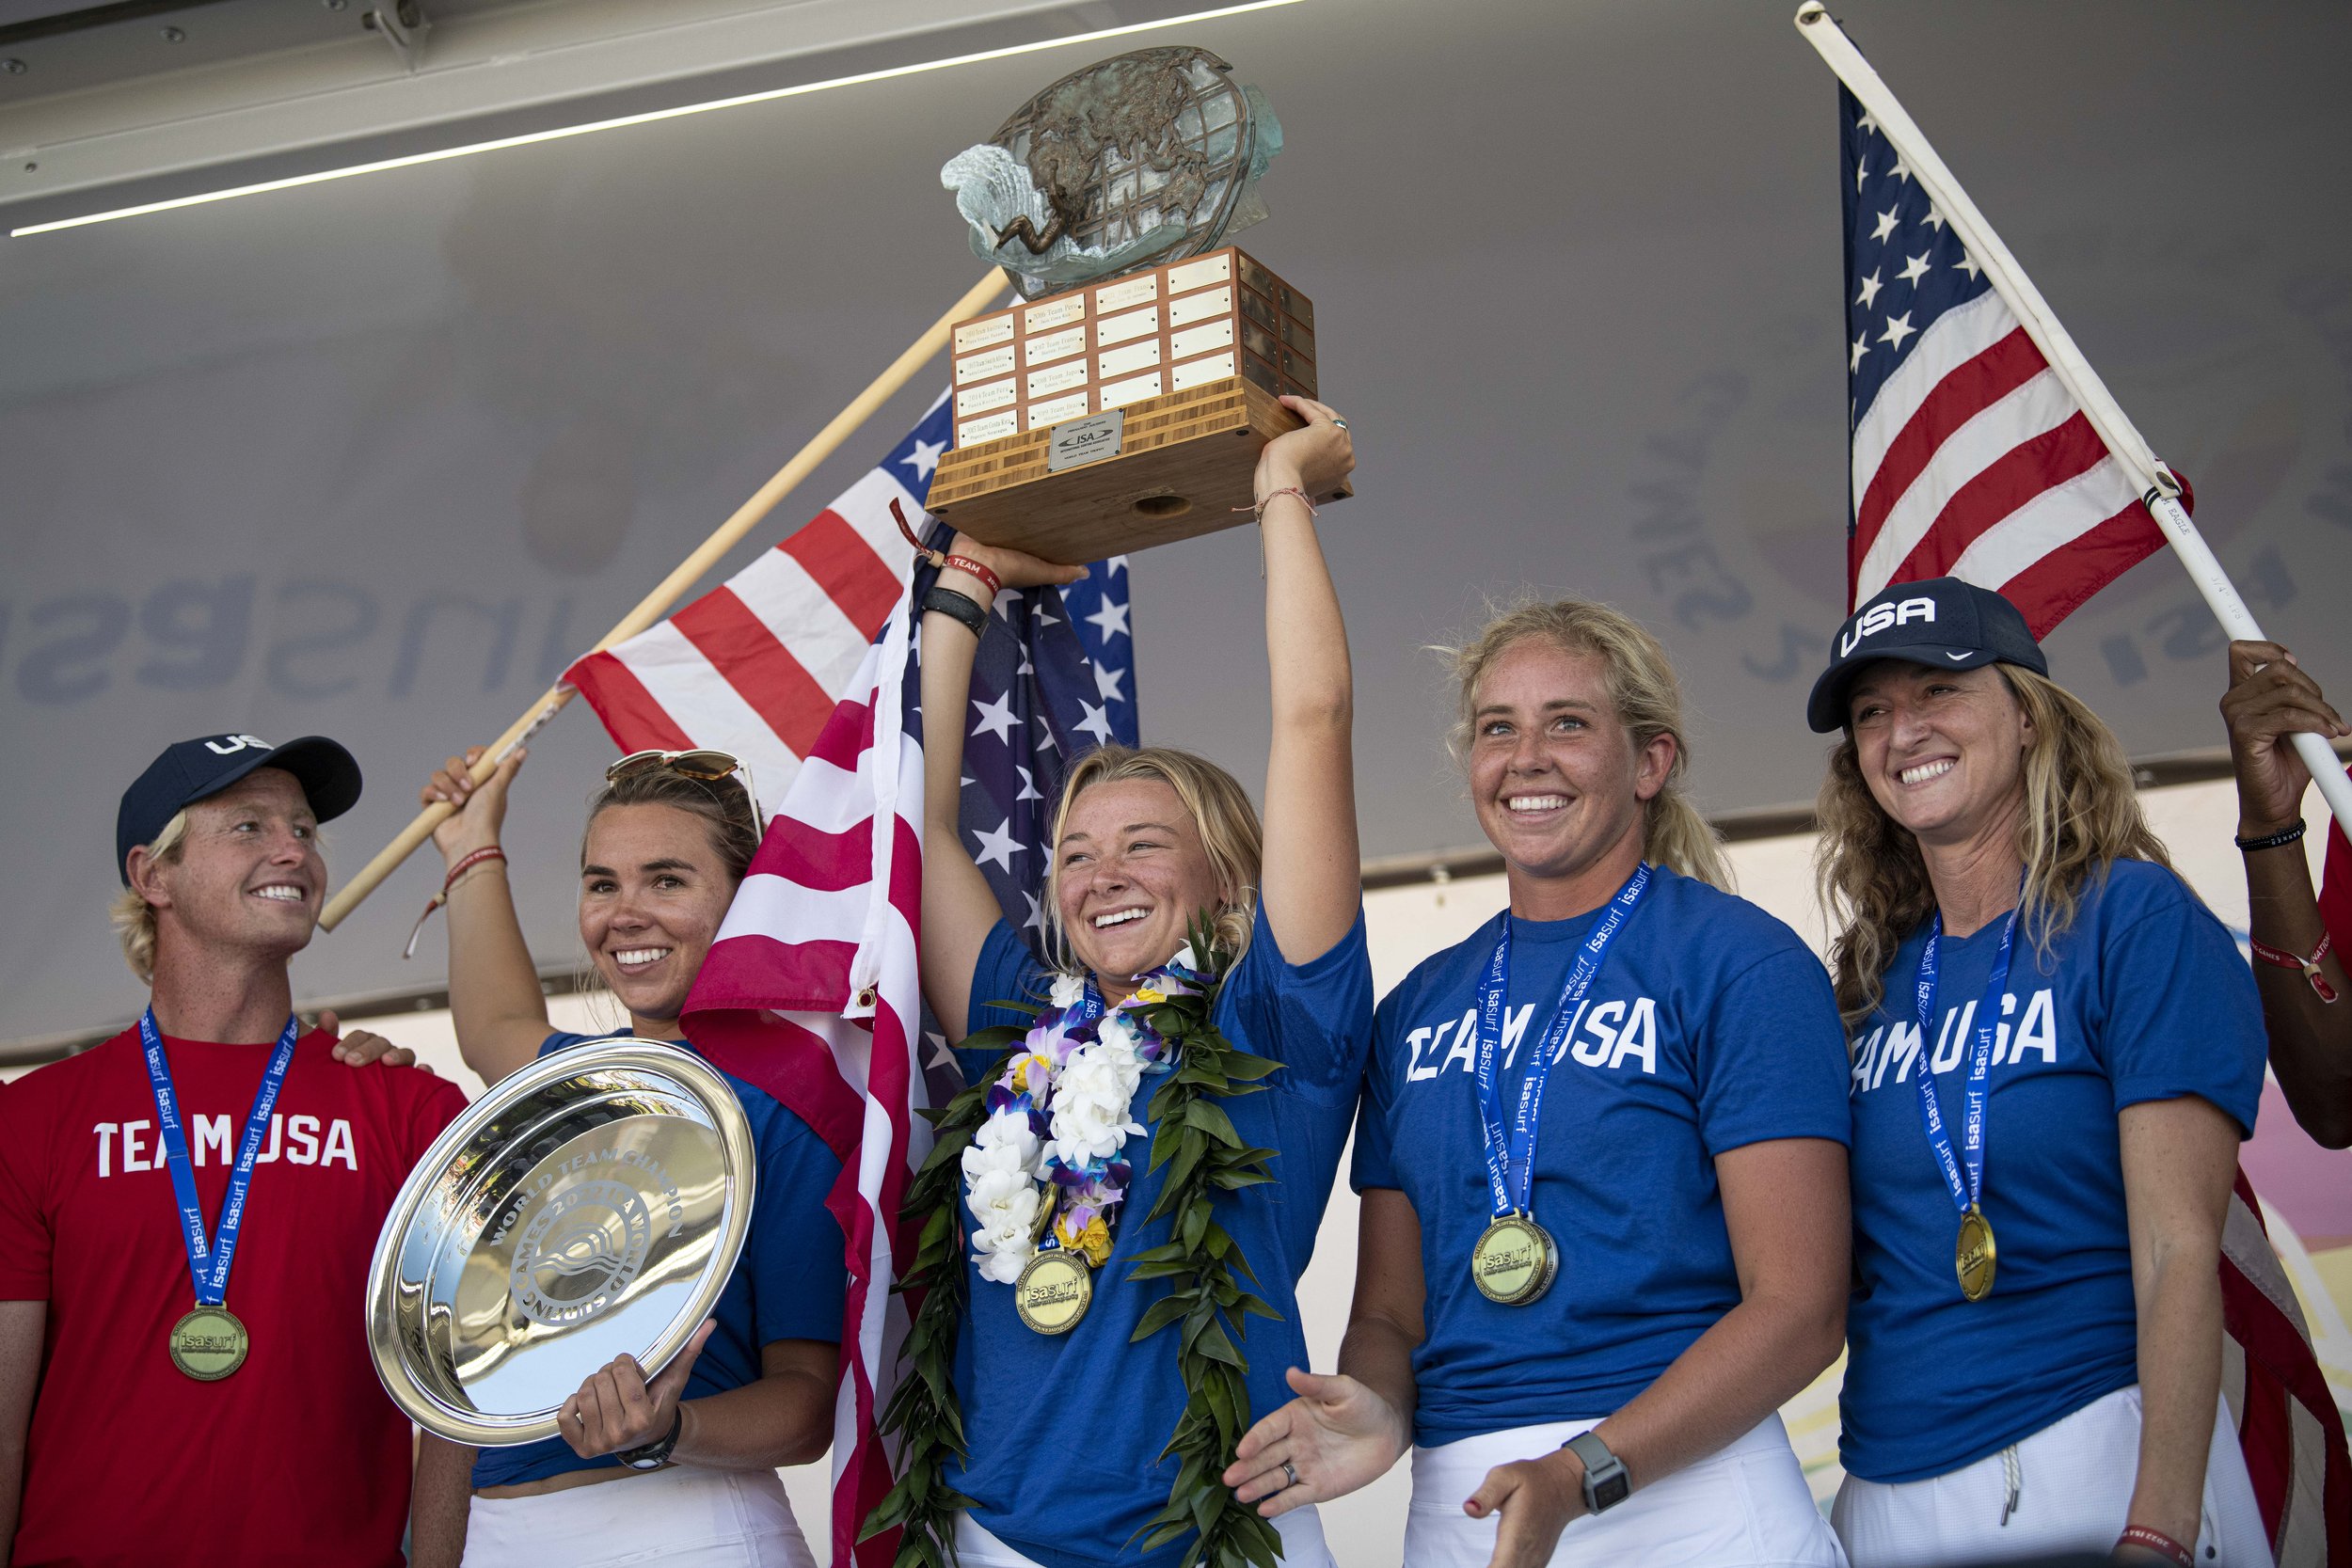  Team USA poses for the crowd as they embrace the gold medal earned and overall win at the ISA World Surfing Games. (Jon Putman | The Corsair) 